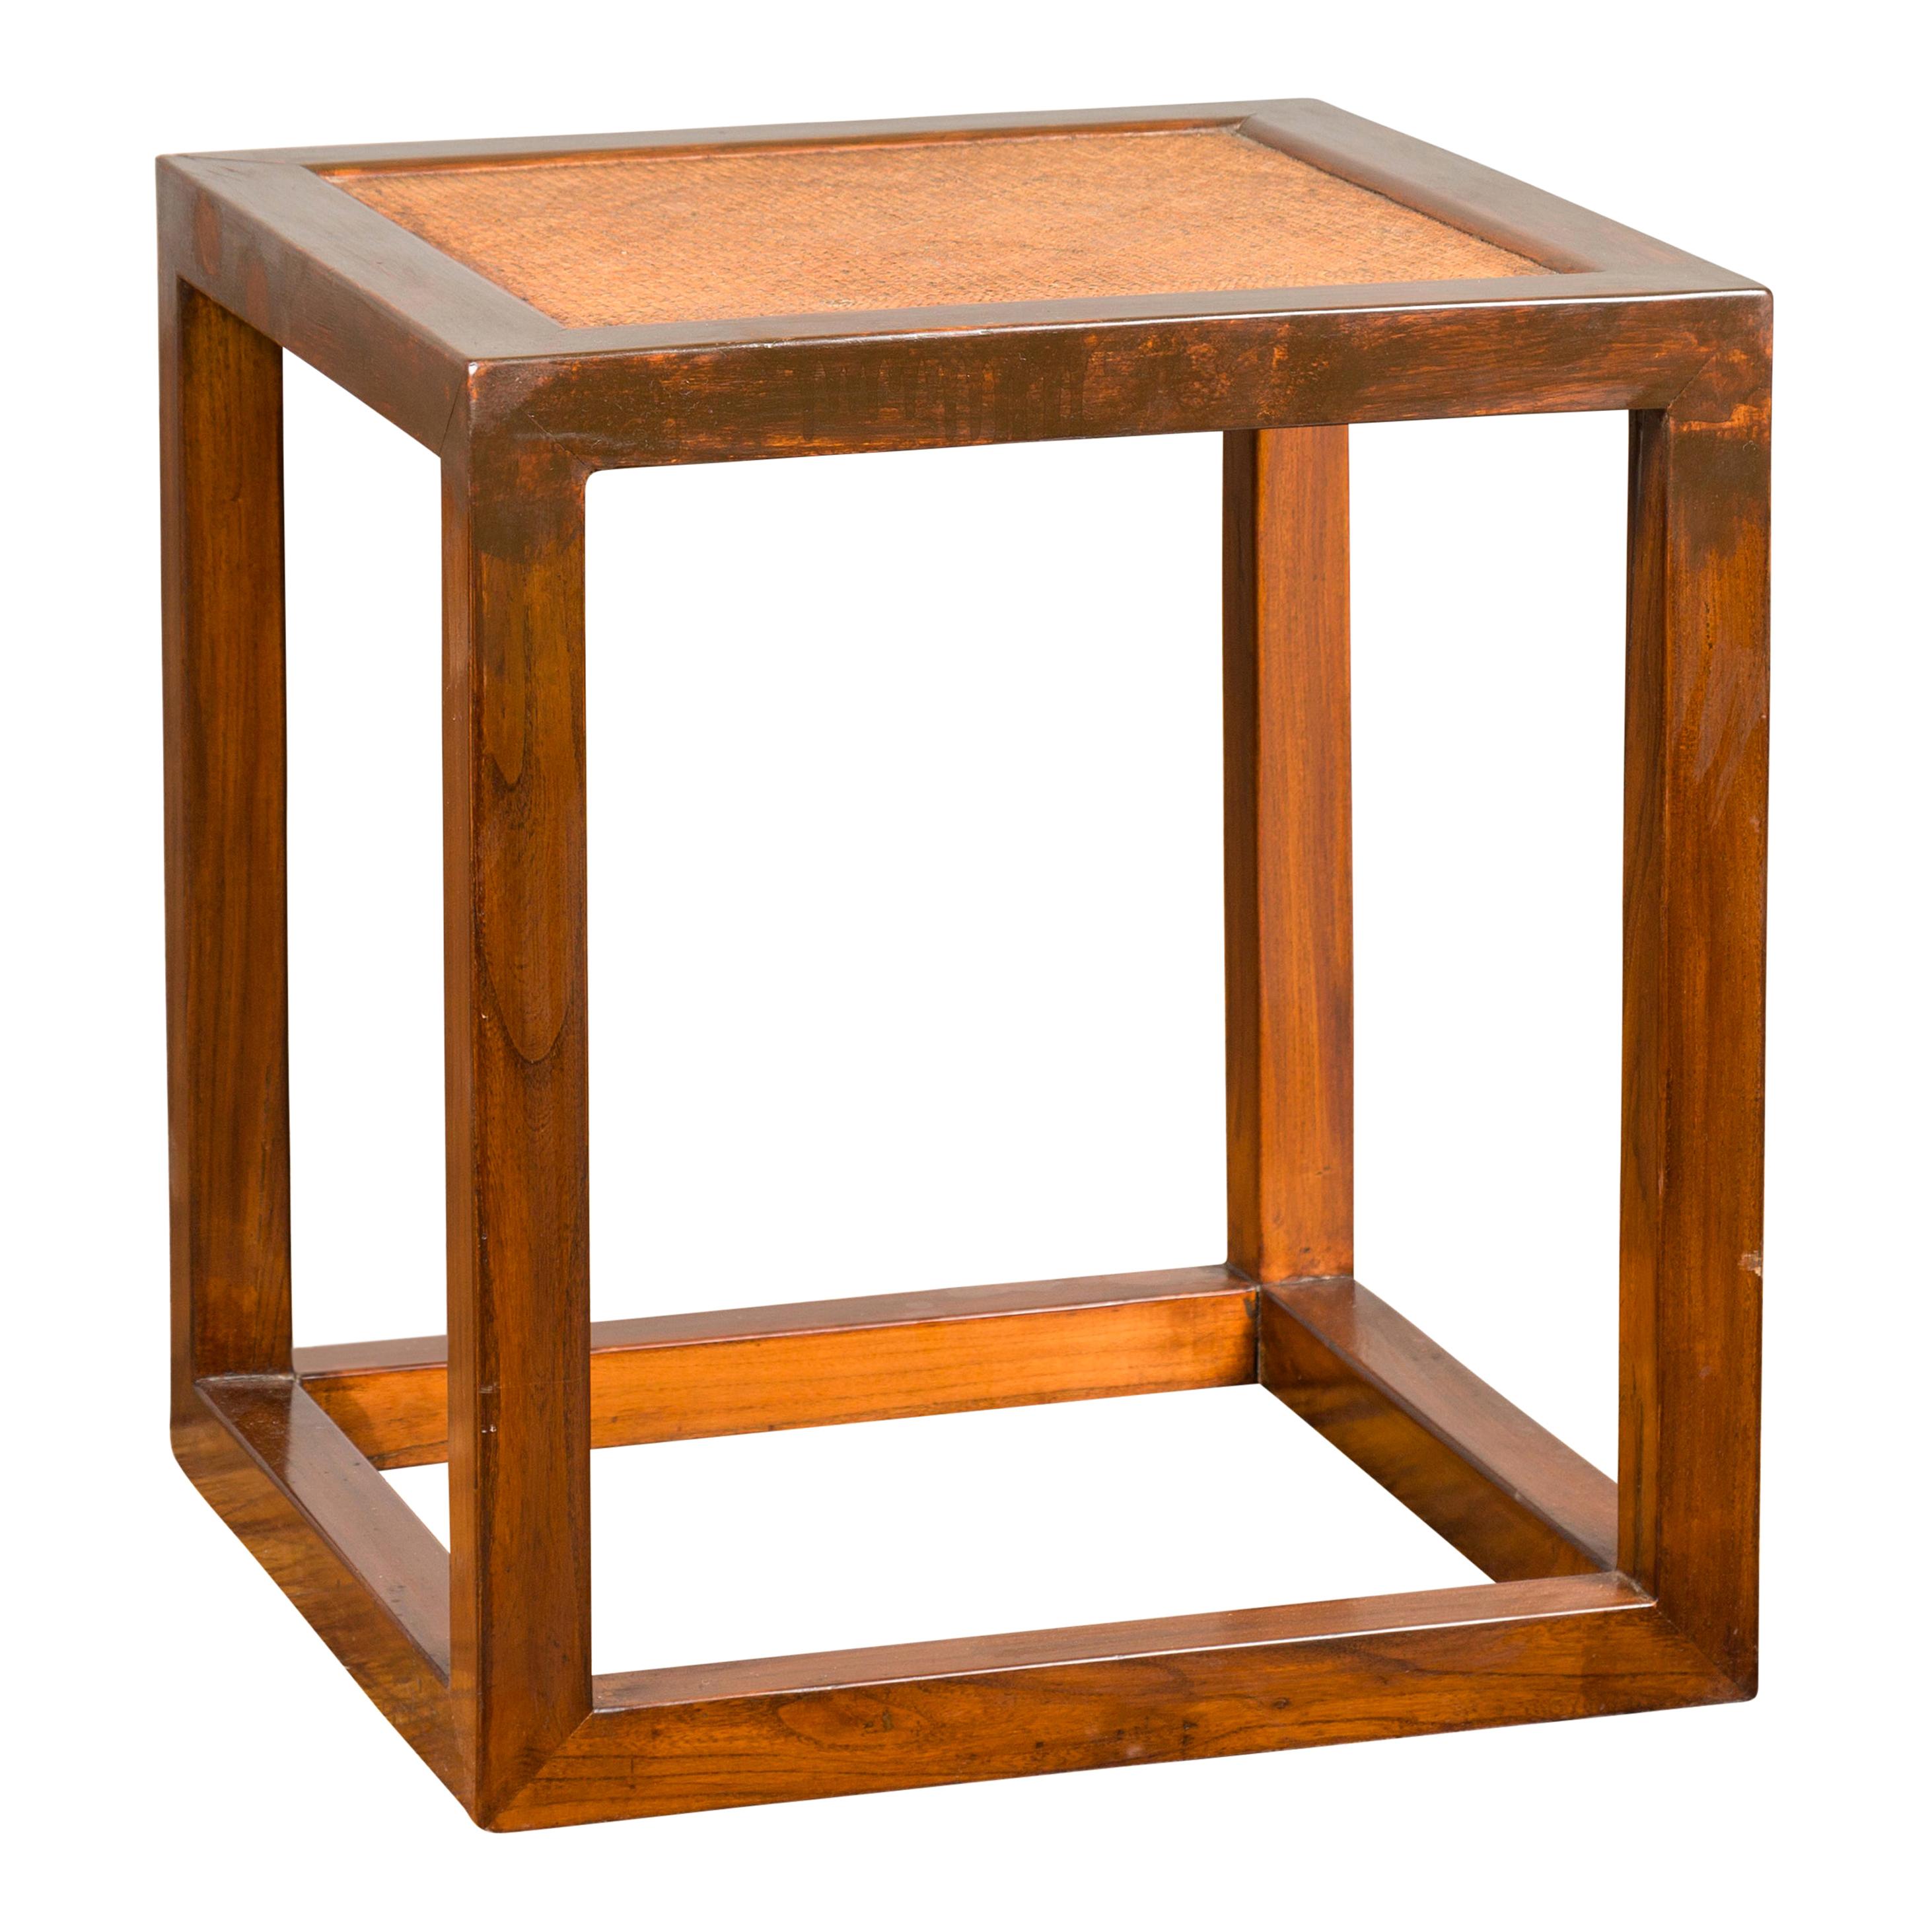 Minimalist Cubic Side Table with Rattan Top, Straight Legs and Stretchers